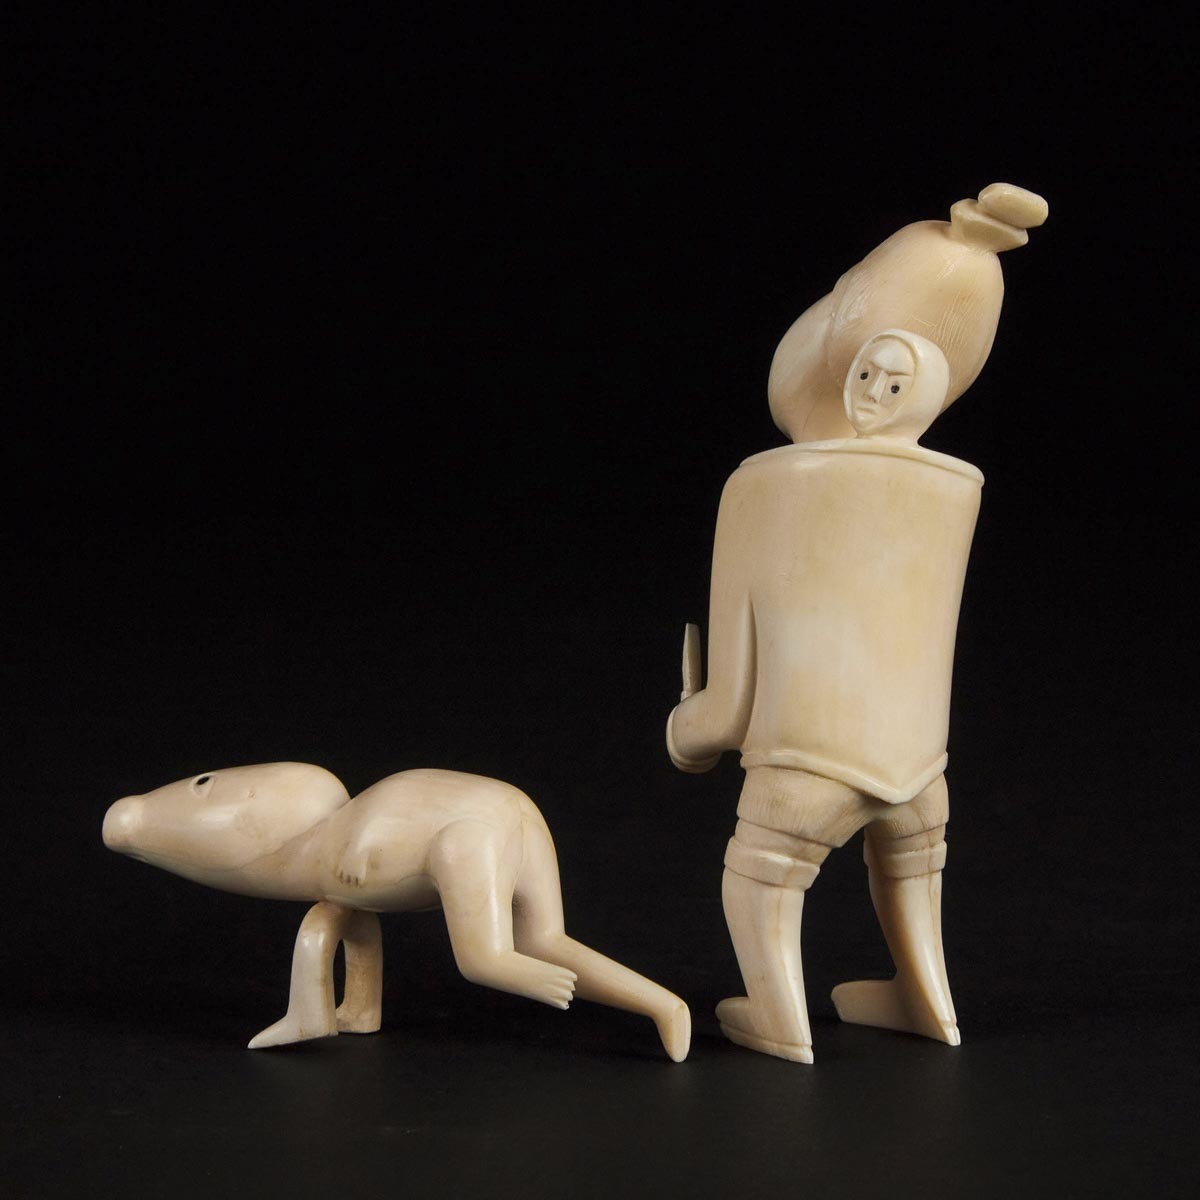 Unidentified Artist, PAIR OF TUPILAQS, ivory, largest 4.75 x 2 x 1.5 in — 12.1 x 5.1 x 3.8 cm - Image 3 of 3